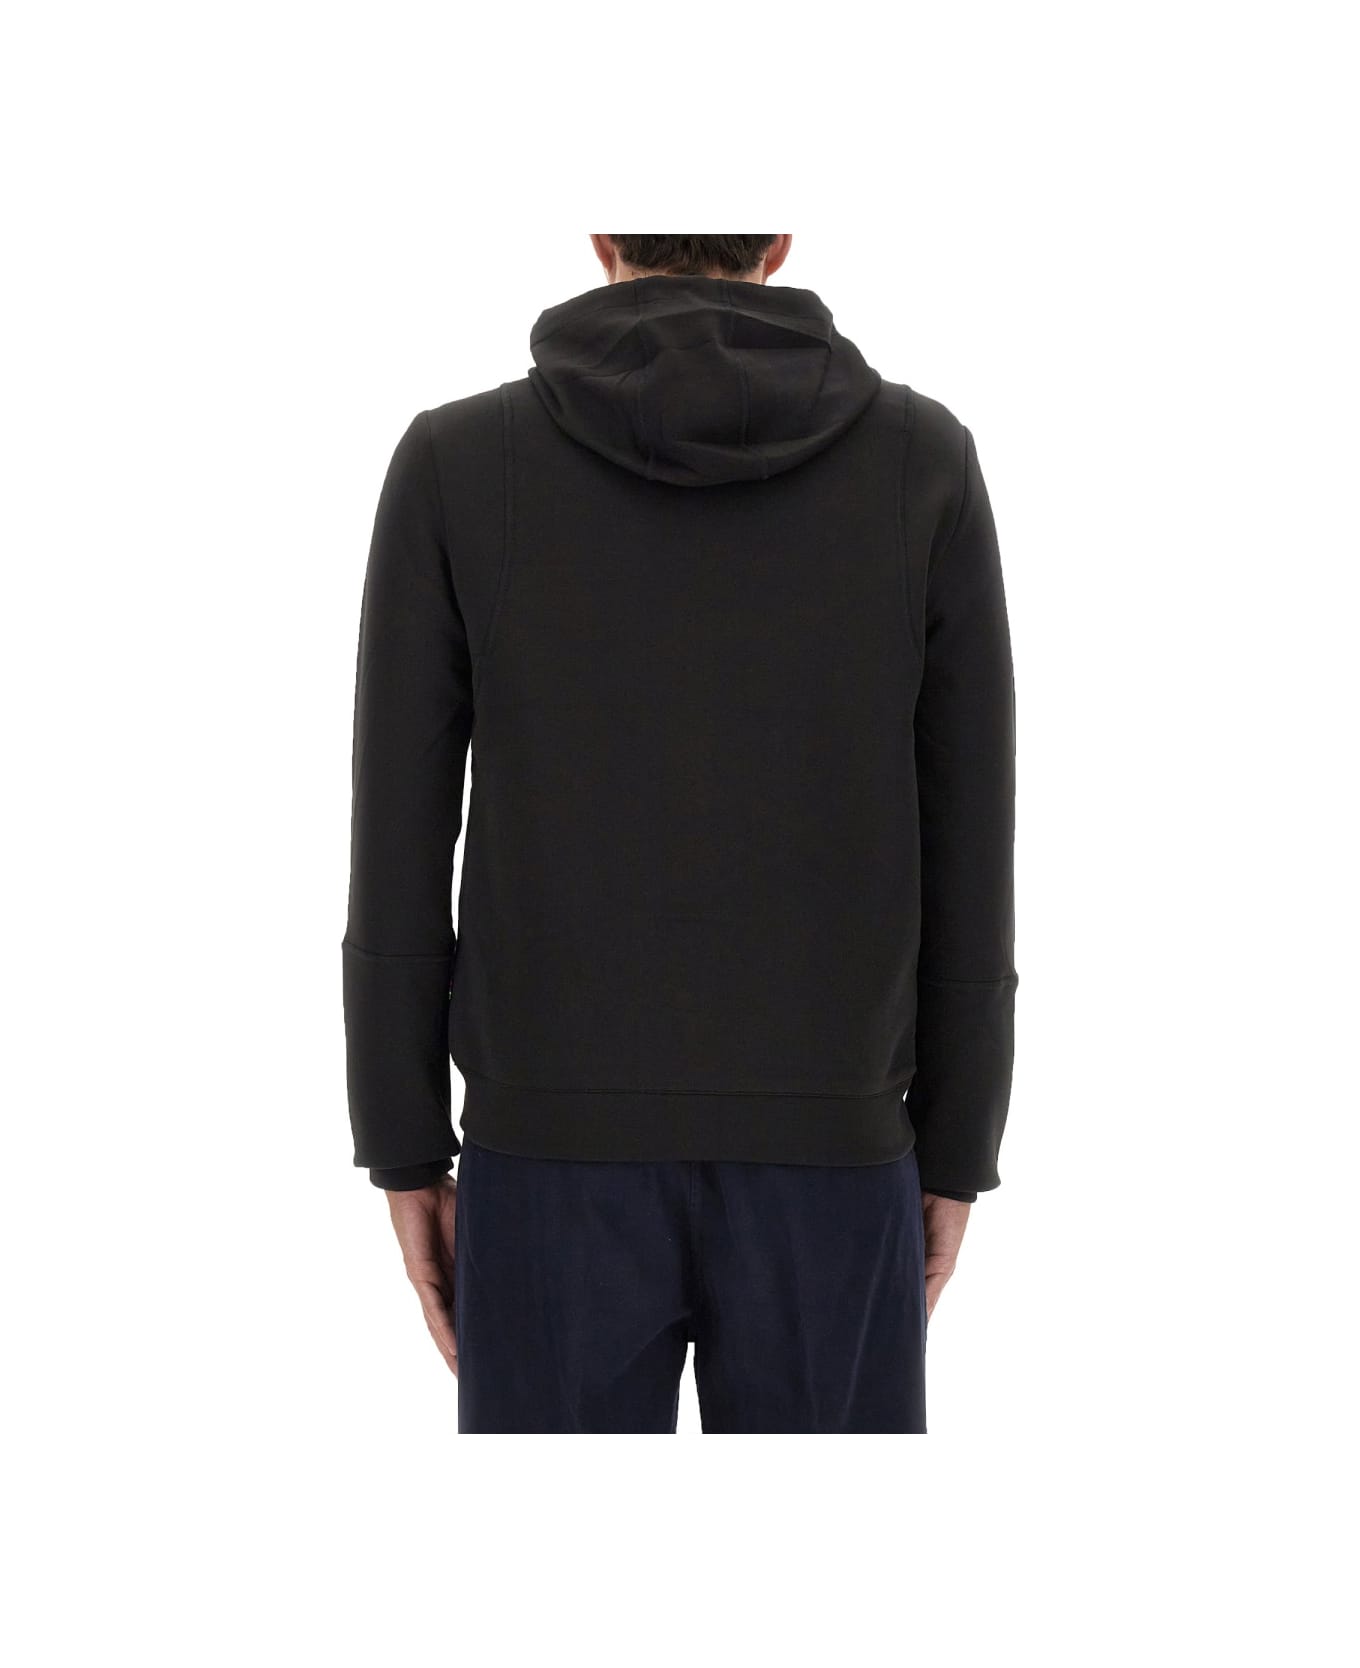 PS by Paul Smith Hooded Jacket - BLACK ジャケット